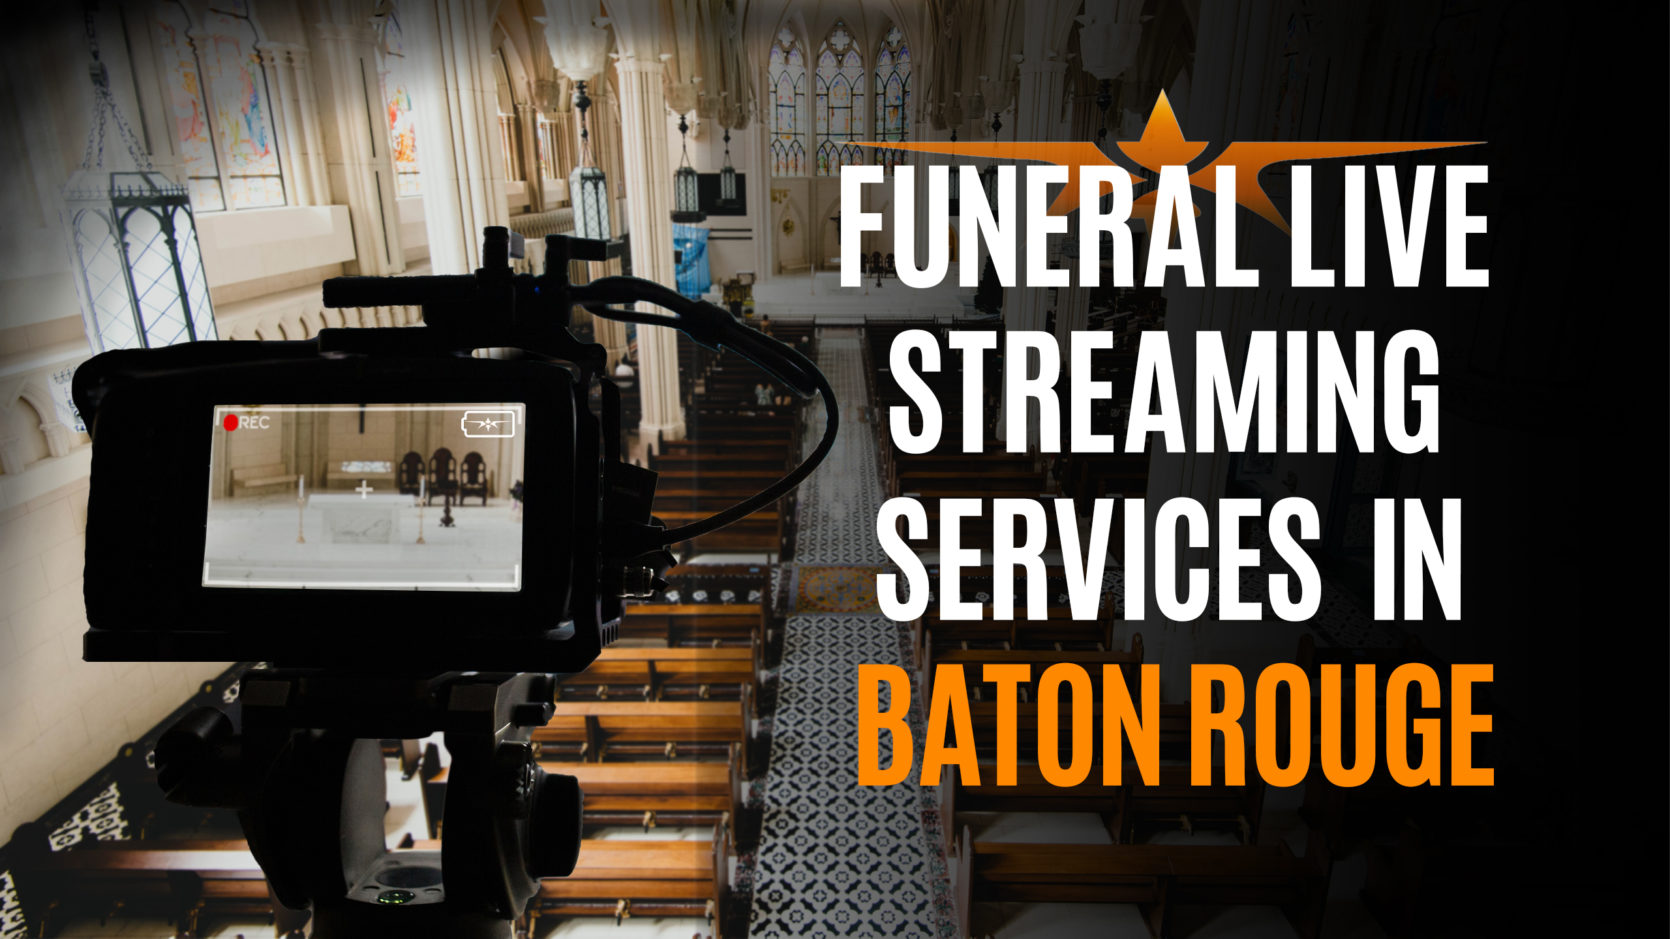 Funeral Live Streaming Services in Baton Rouge